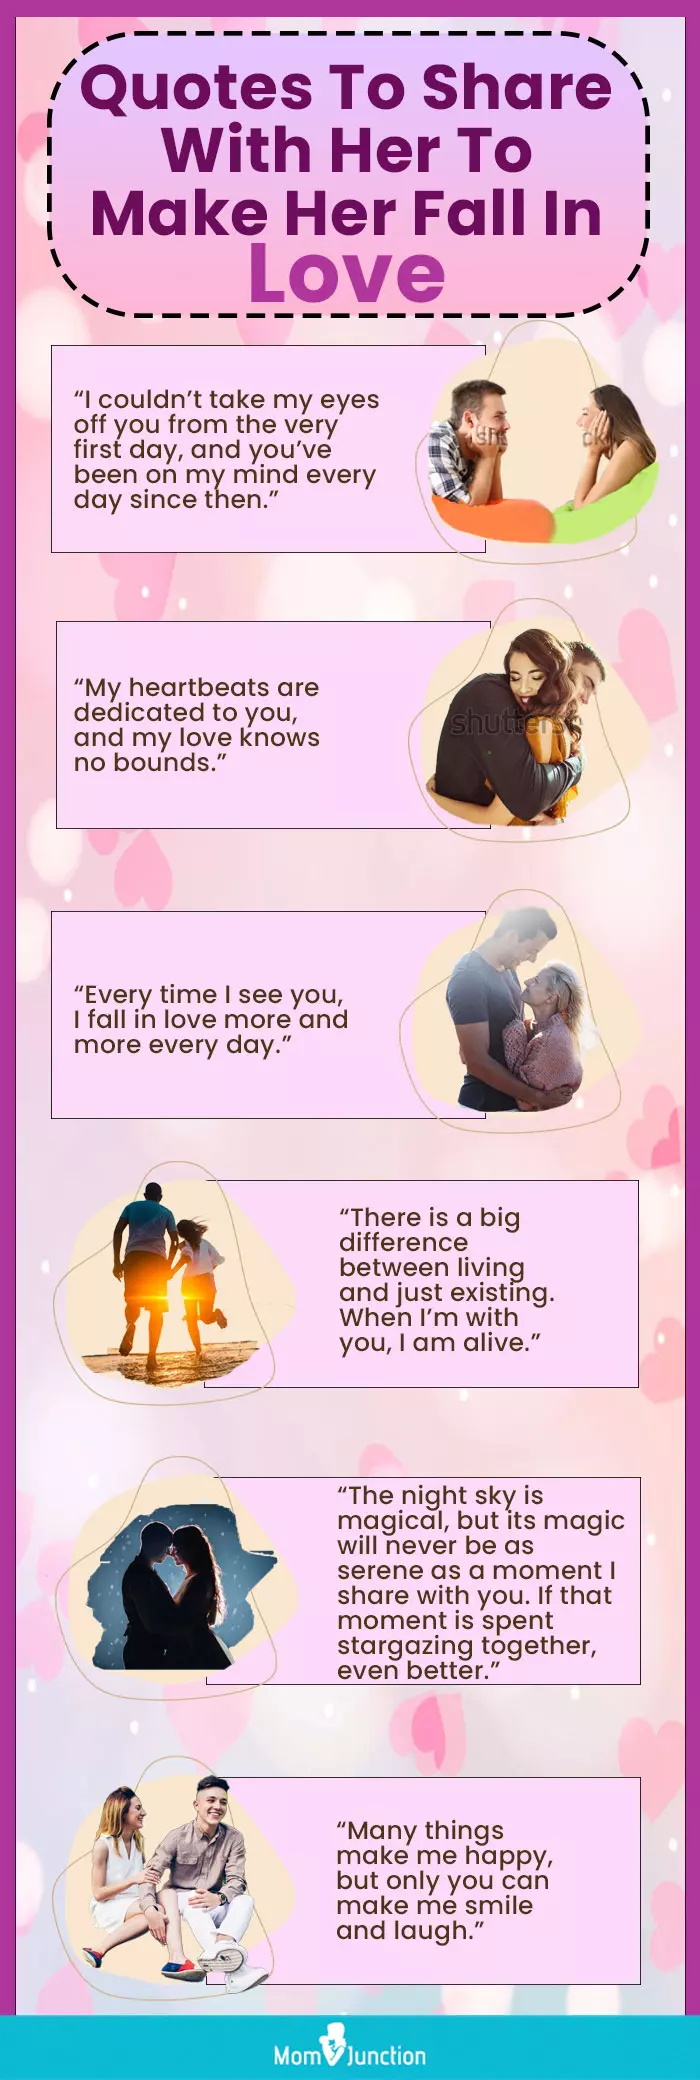 quotes to make her fall in love (infographic)